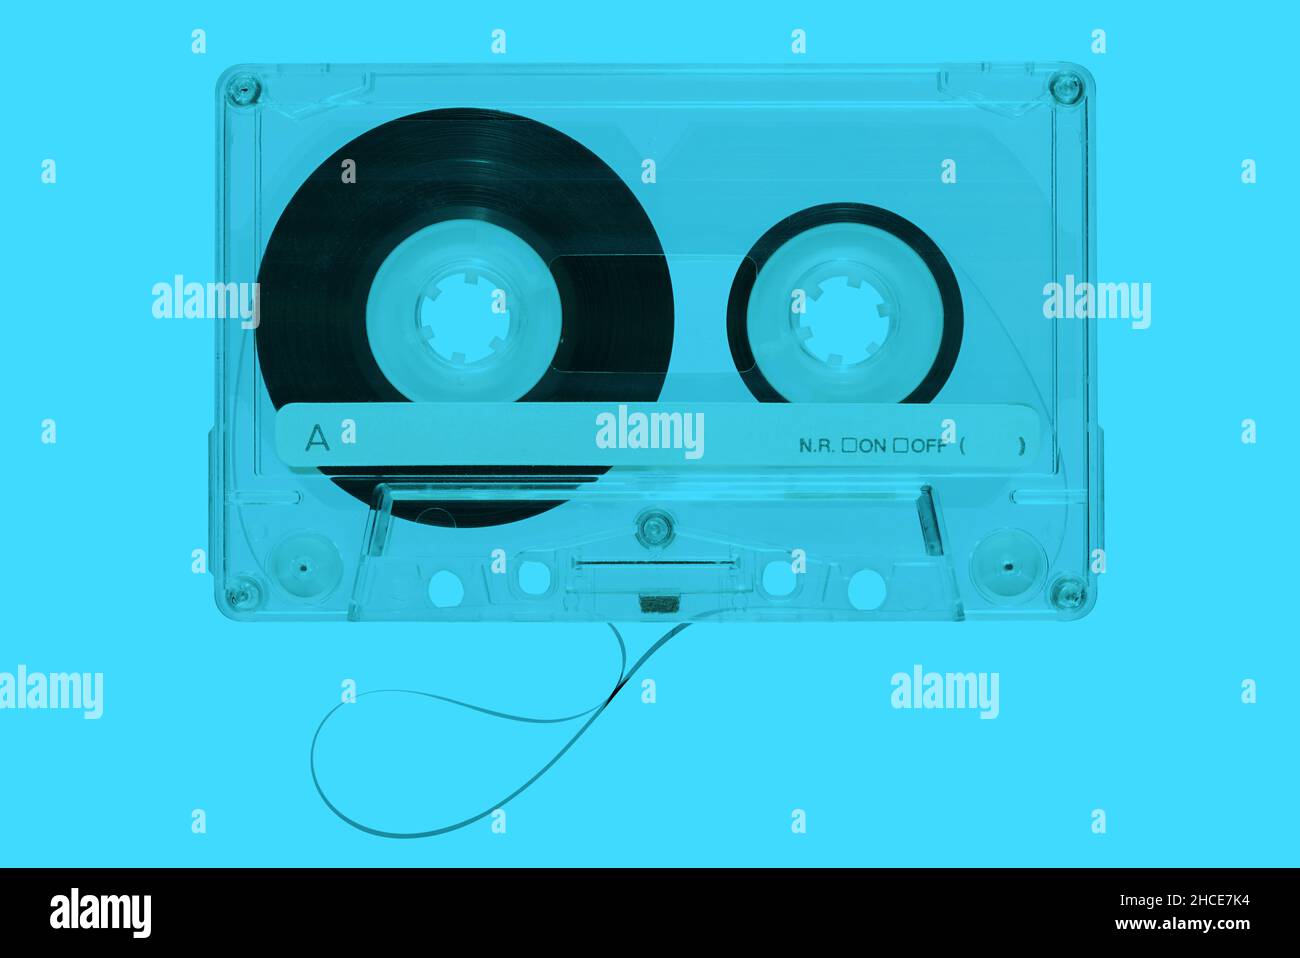 Top view of plastic vintage audio cassette with magnetic tape on bright blue background Stock Photo